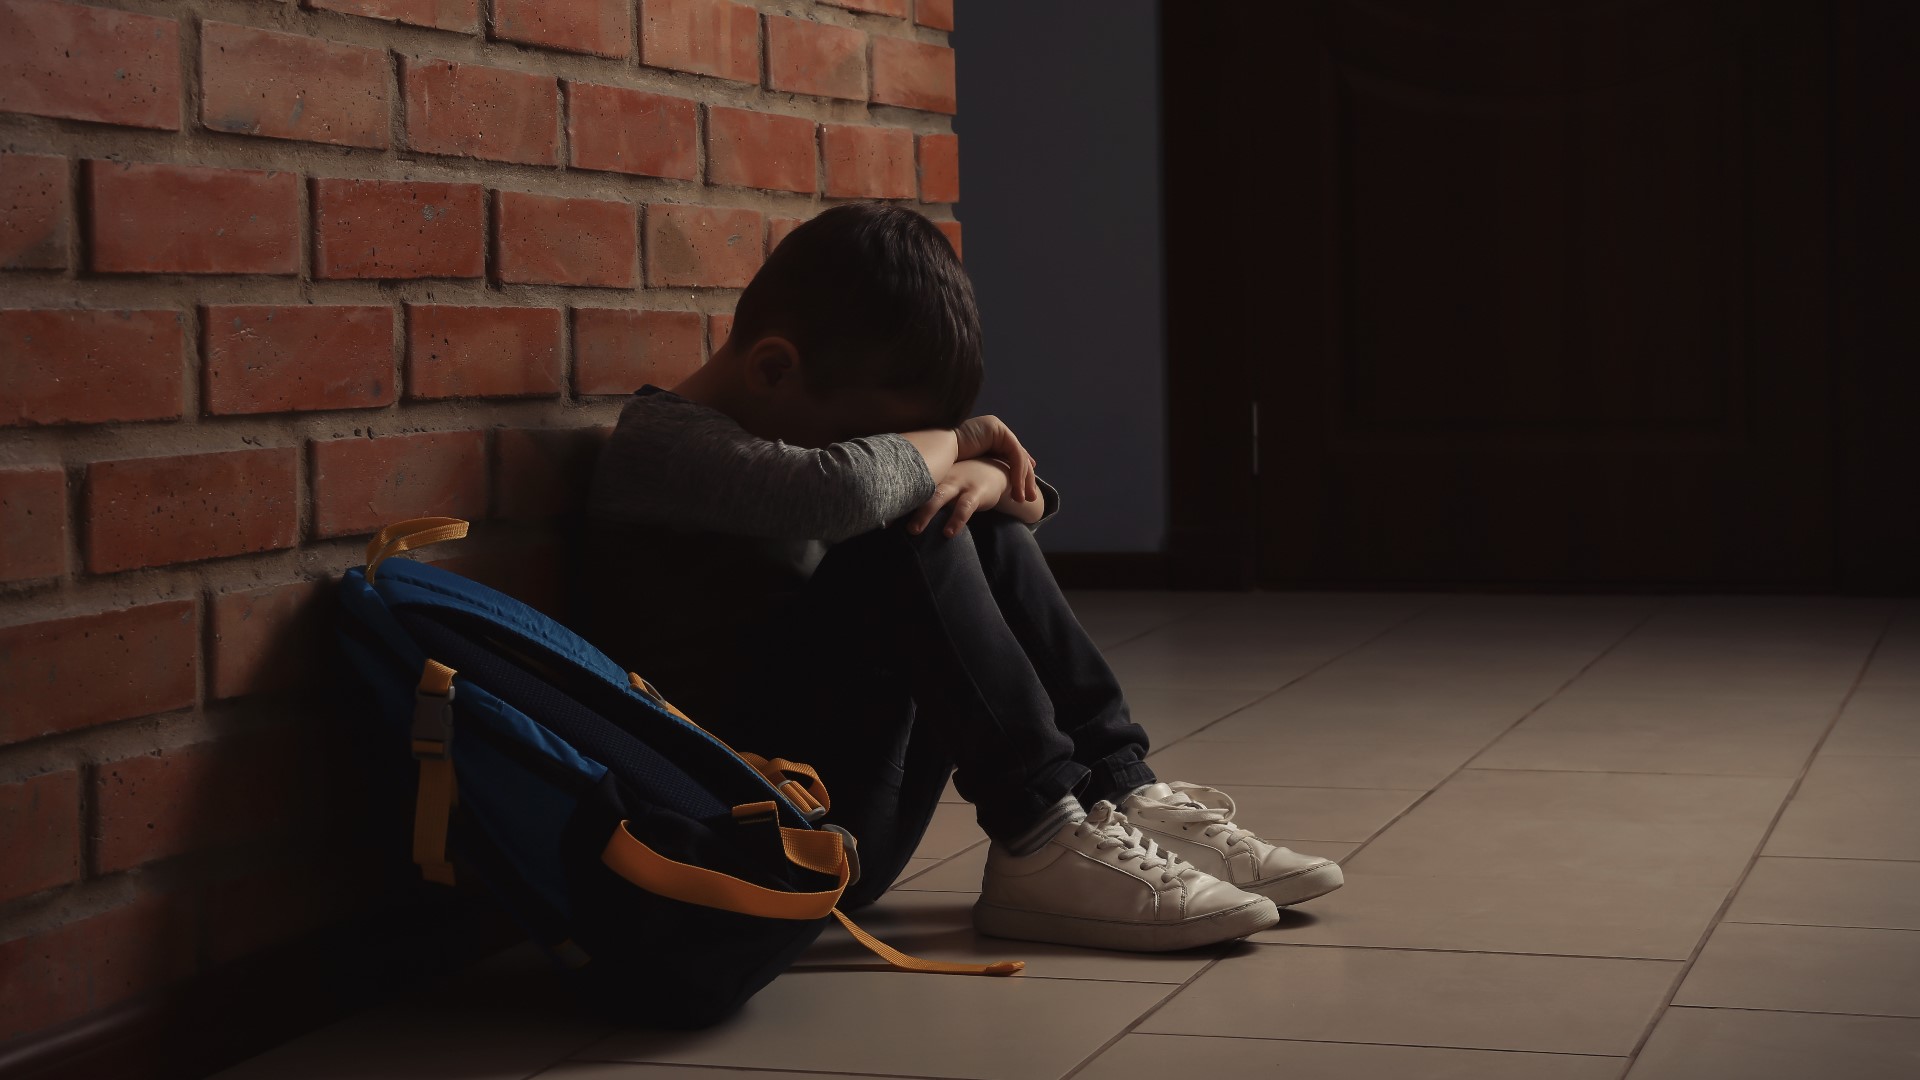 The number of children seeking help for depression, anxiety, and suicide is overwhelming the system because there are not enough therapists to treat them.